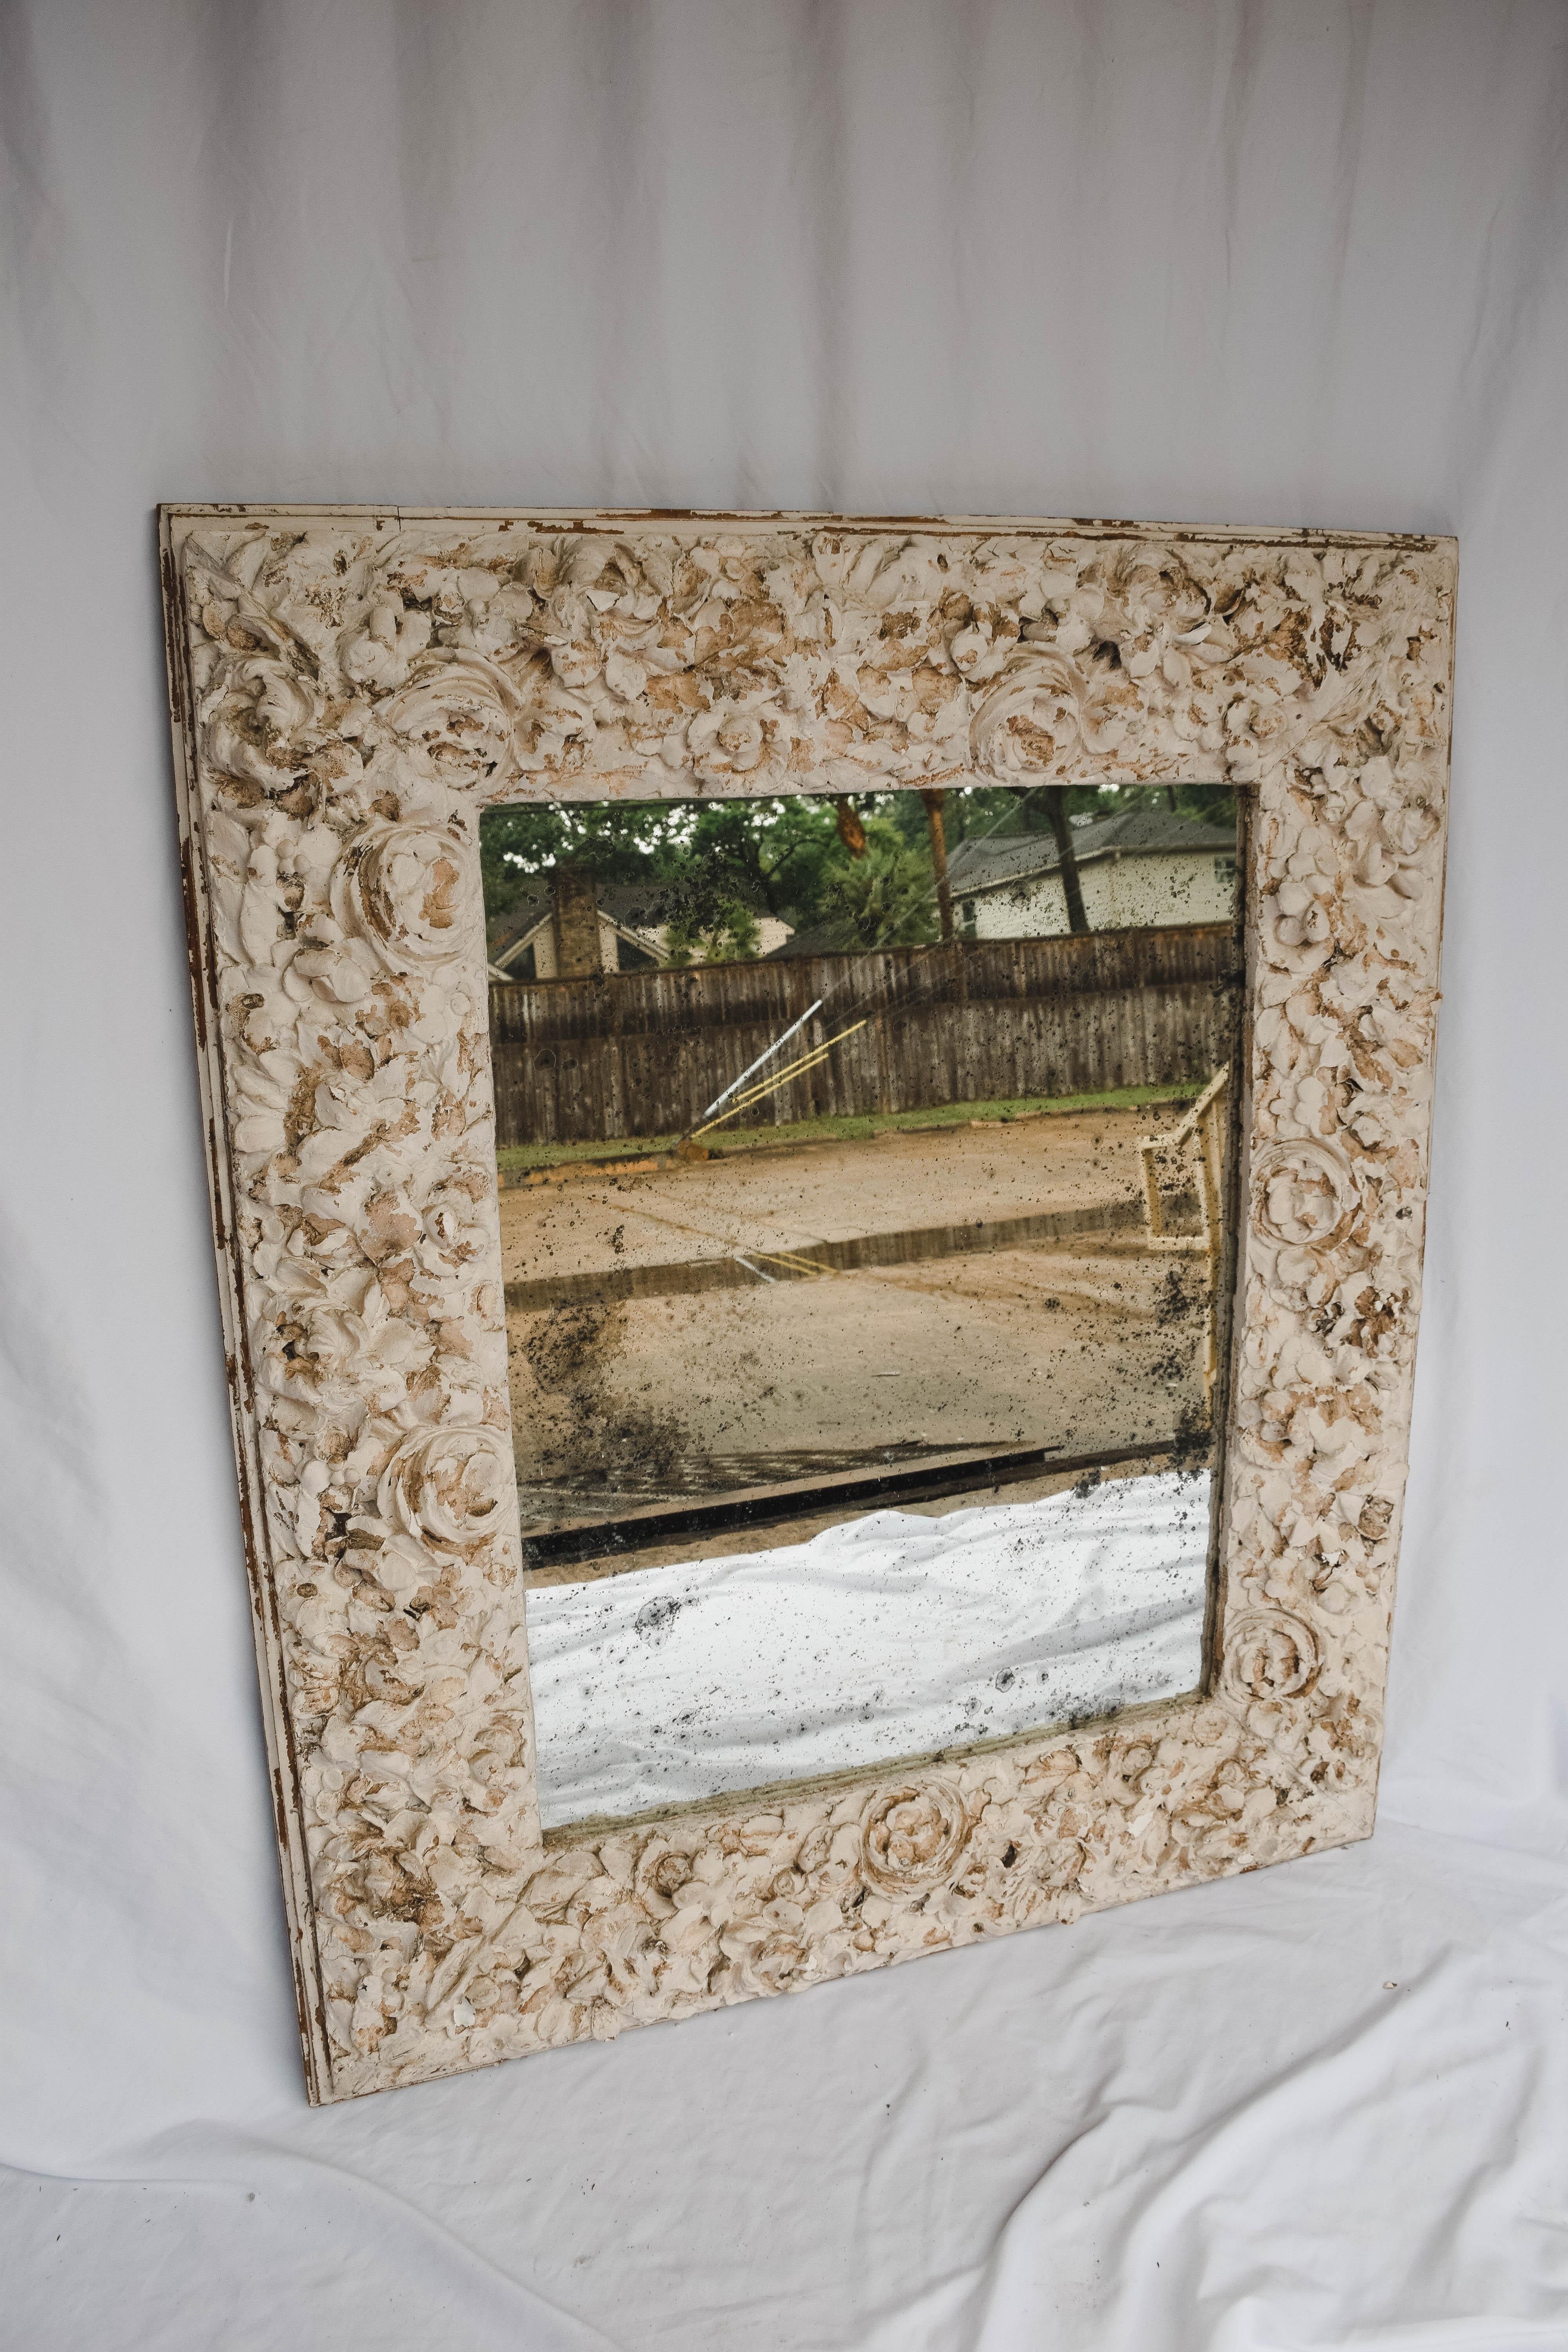 This architectural element framed mirror is a romantic piece. Would be lovely in a powder bath or entry. It was purchased in the south of France from a dealer who specializes in curating pieces destined for the trash to create these beautiful